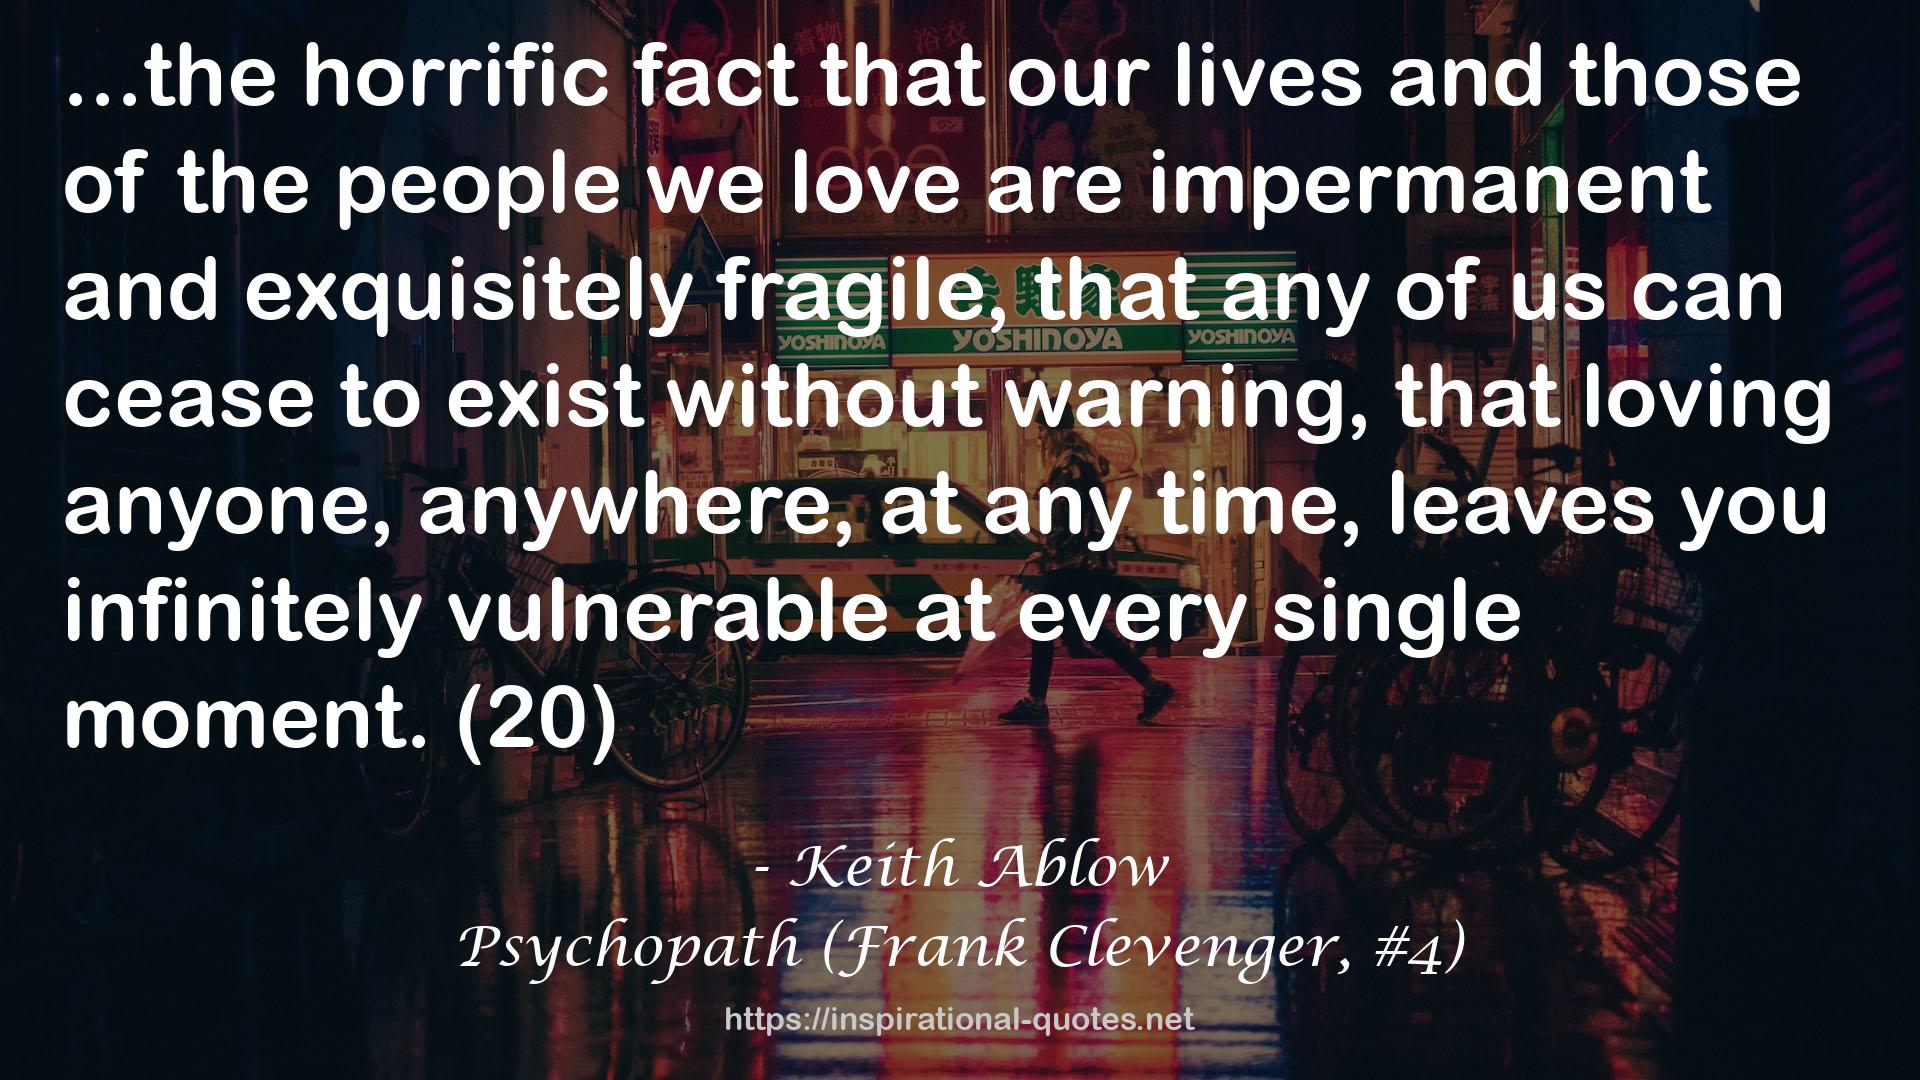 Psychopath (Frank Clevenger, #4) QUOTES